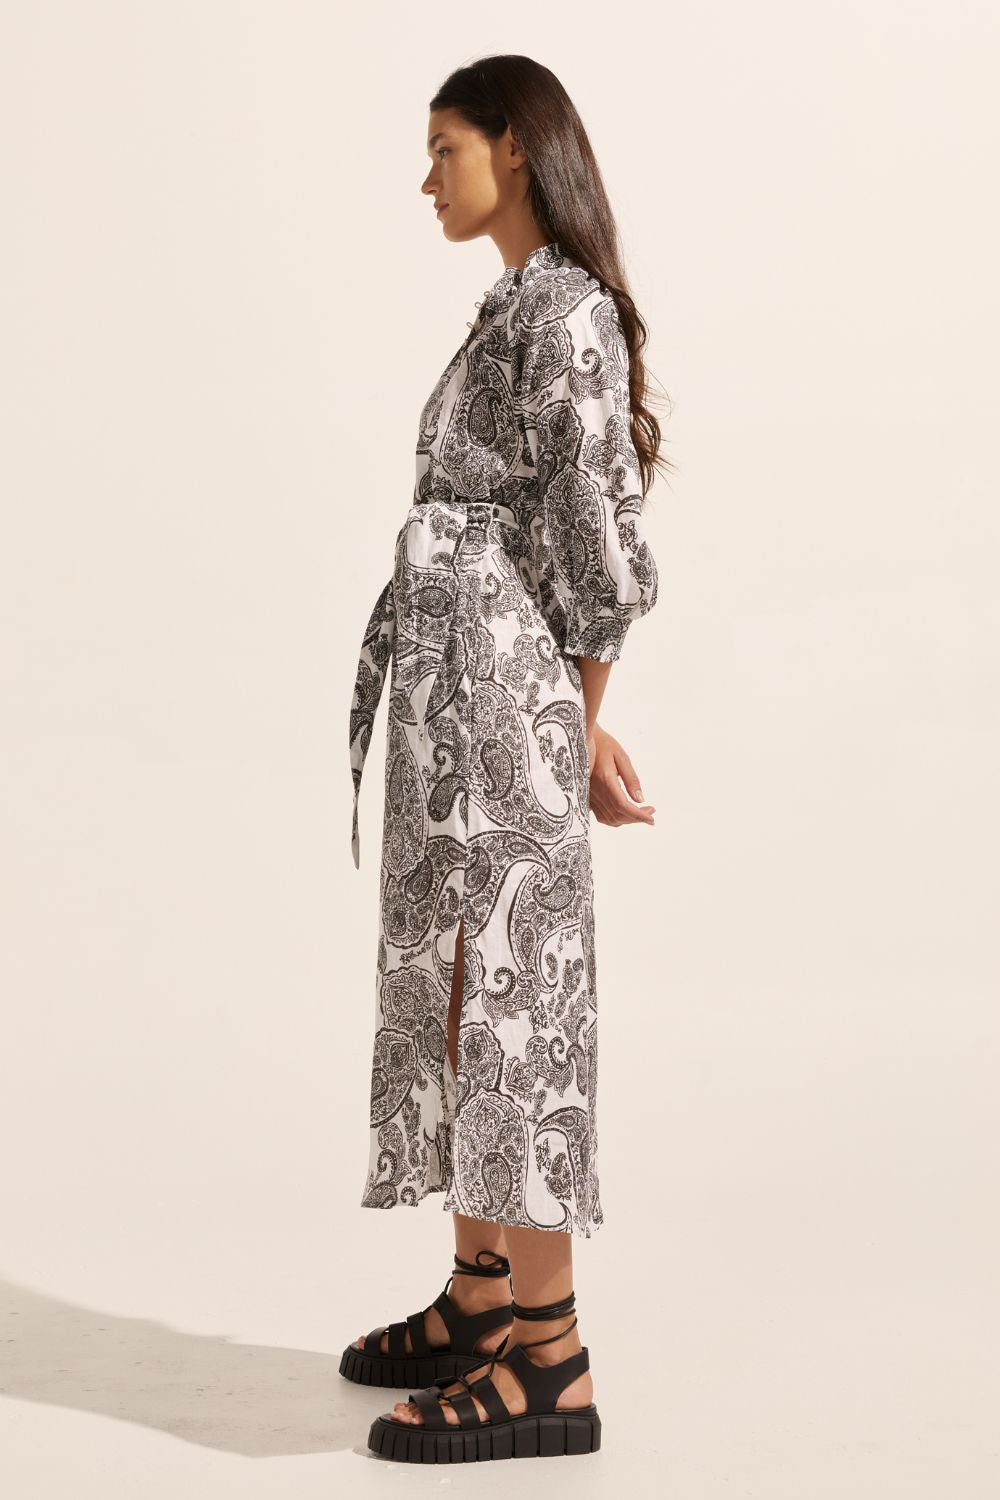 black and white print, self tie fabric belt, high neck, mid length sleeve, midi dress, side pockets, side view